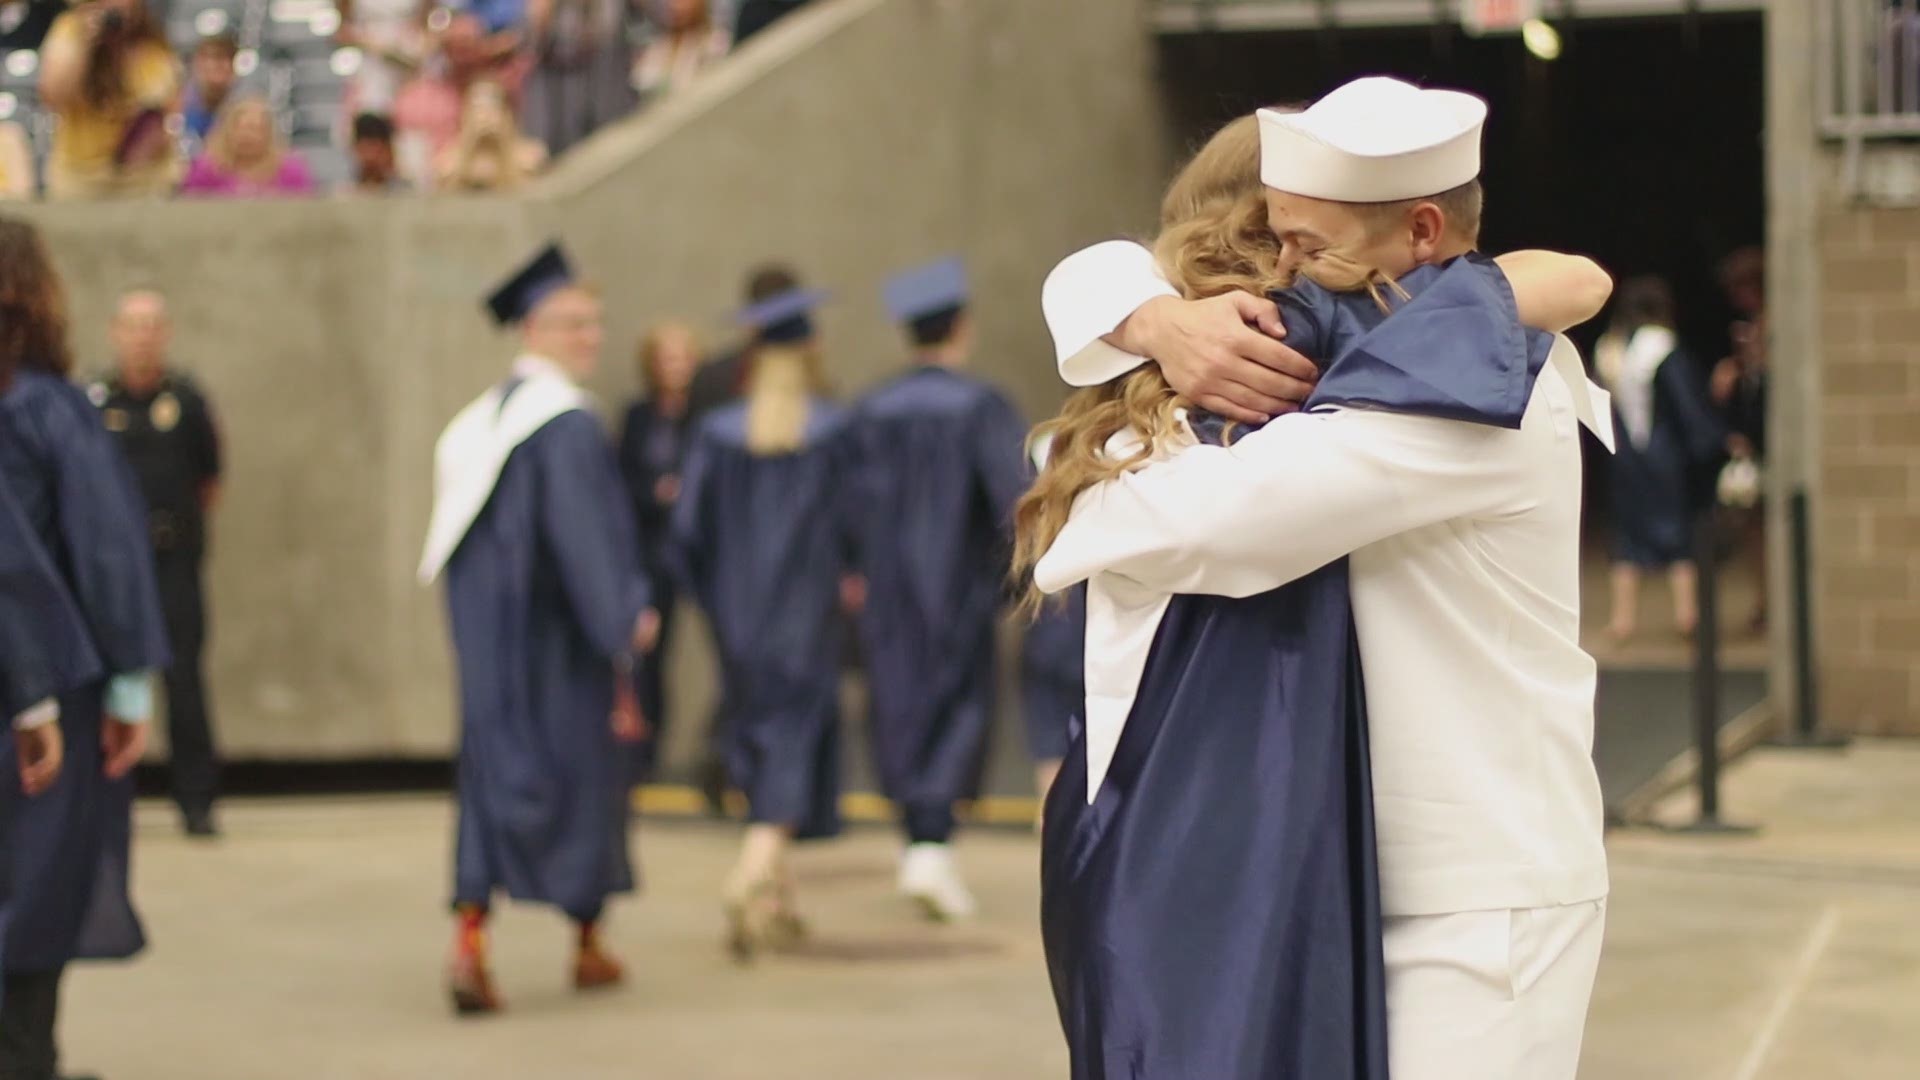 A Klein Collins student got a huge surprise at her graduation. Her brother, who is in the Navy, made it home just in time to see her walk across the stage.